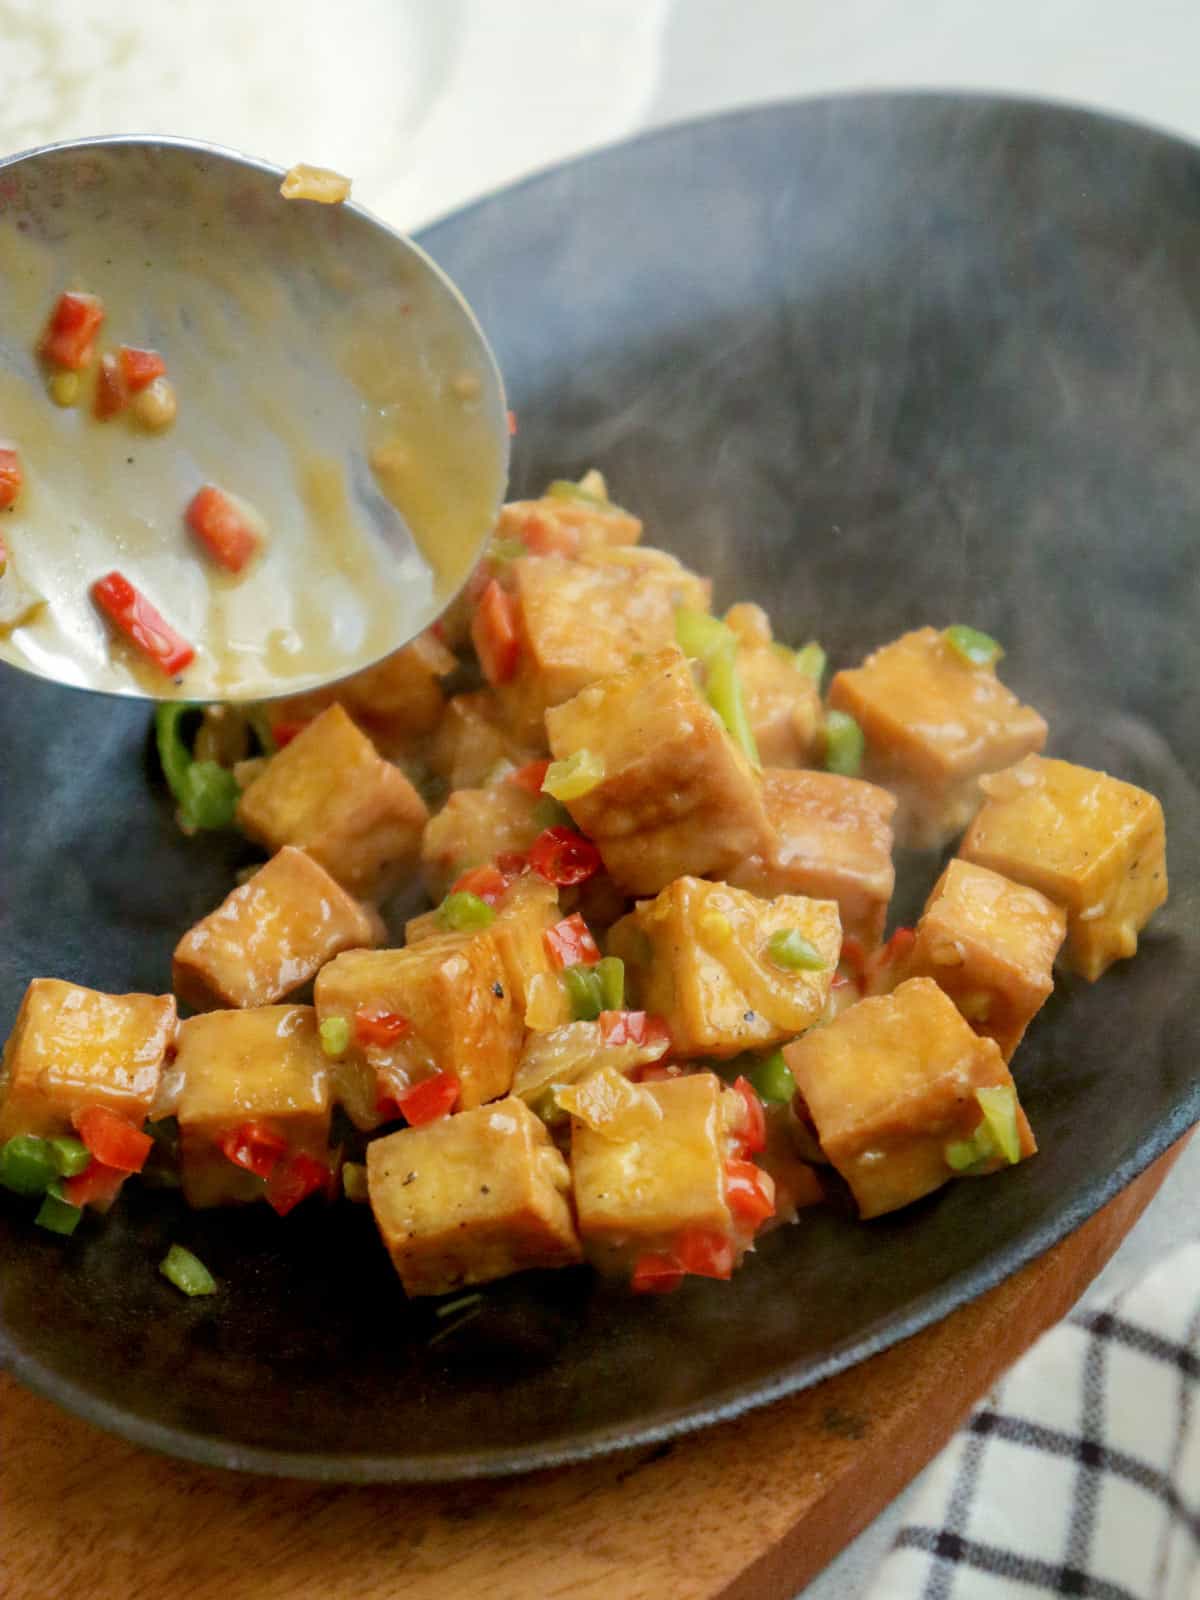 placing sisig tofu on a hot sizzling plate